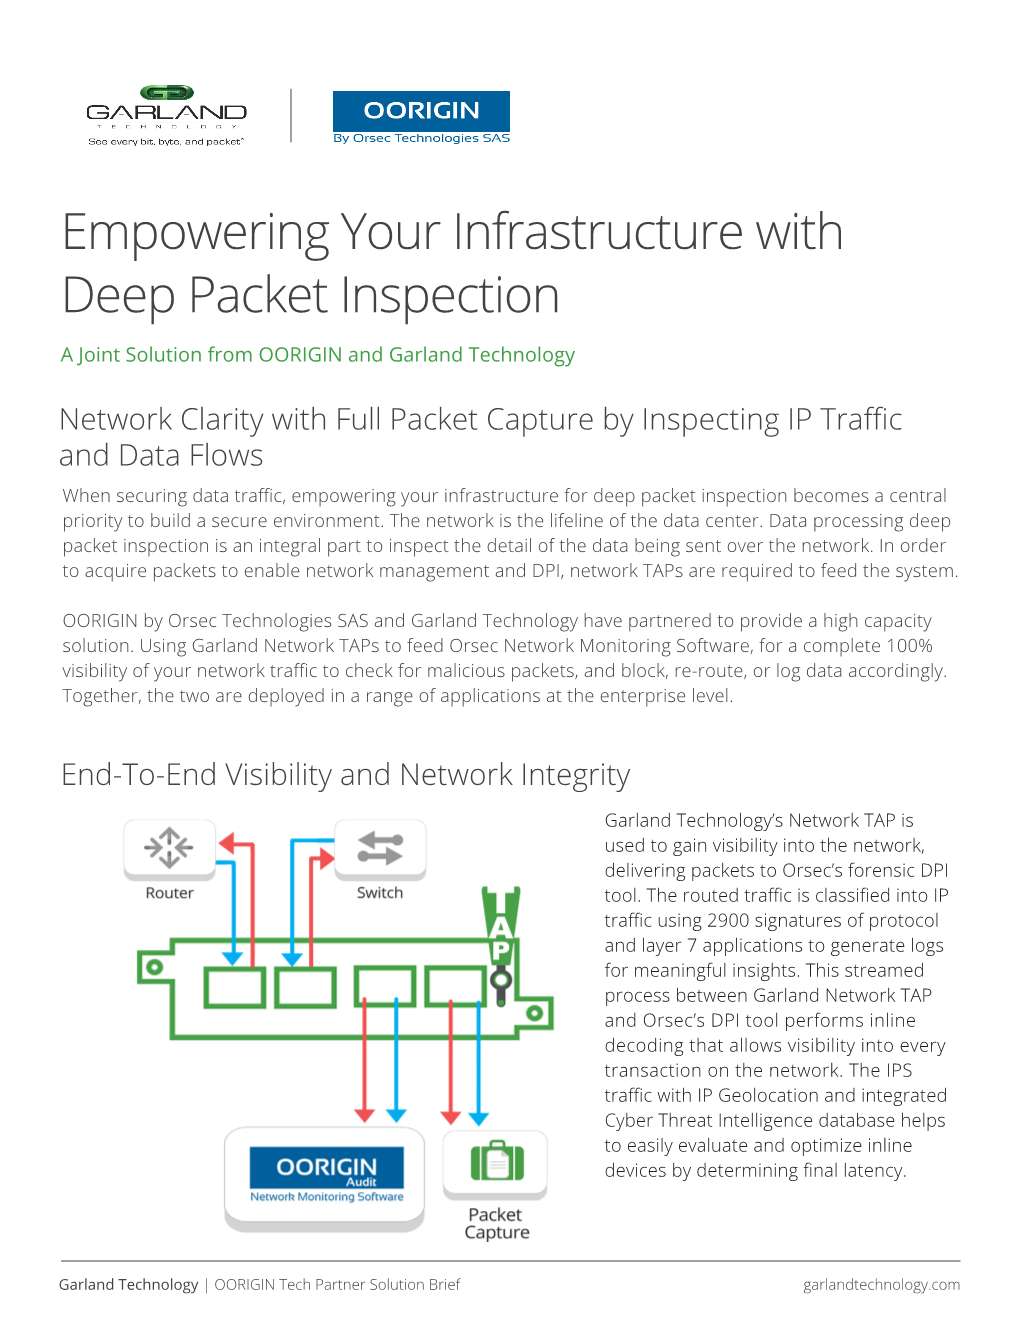 Empowering Your Infrastructure with Deep Packet Inspection